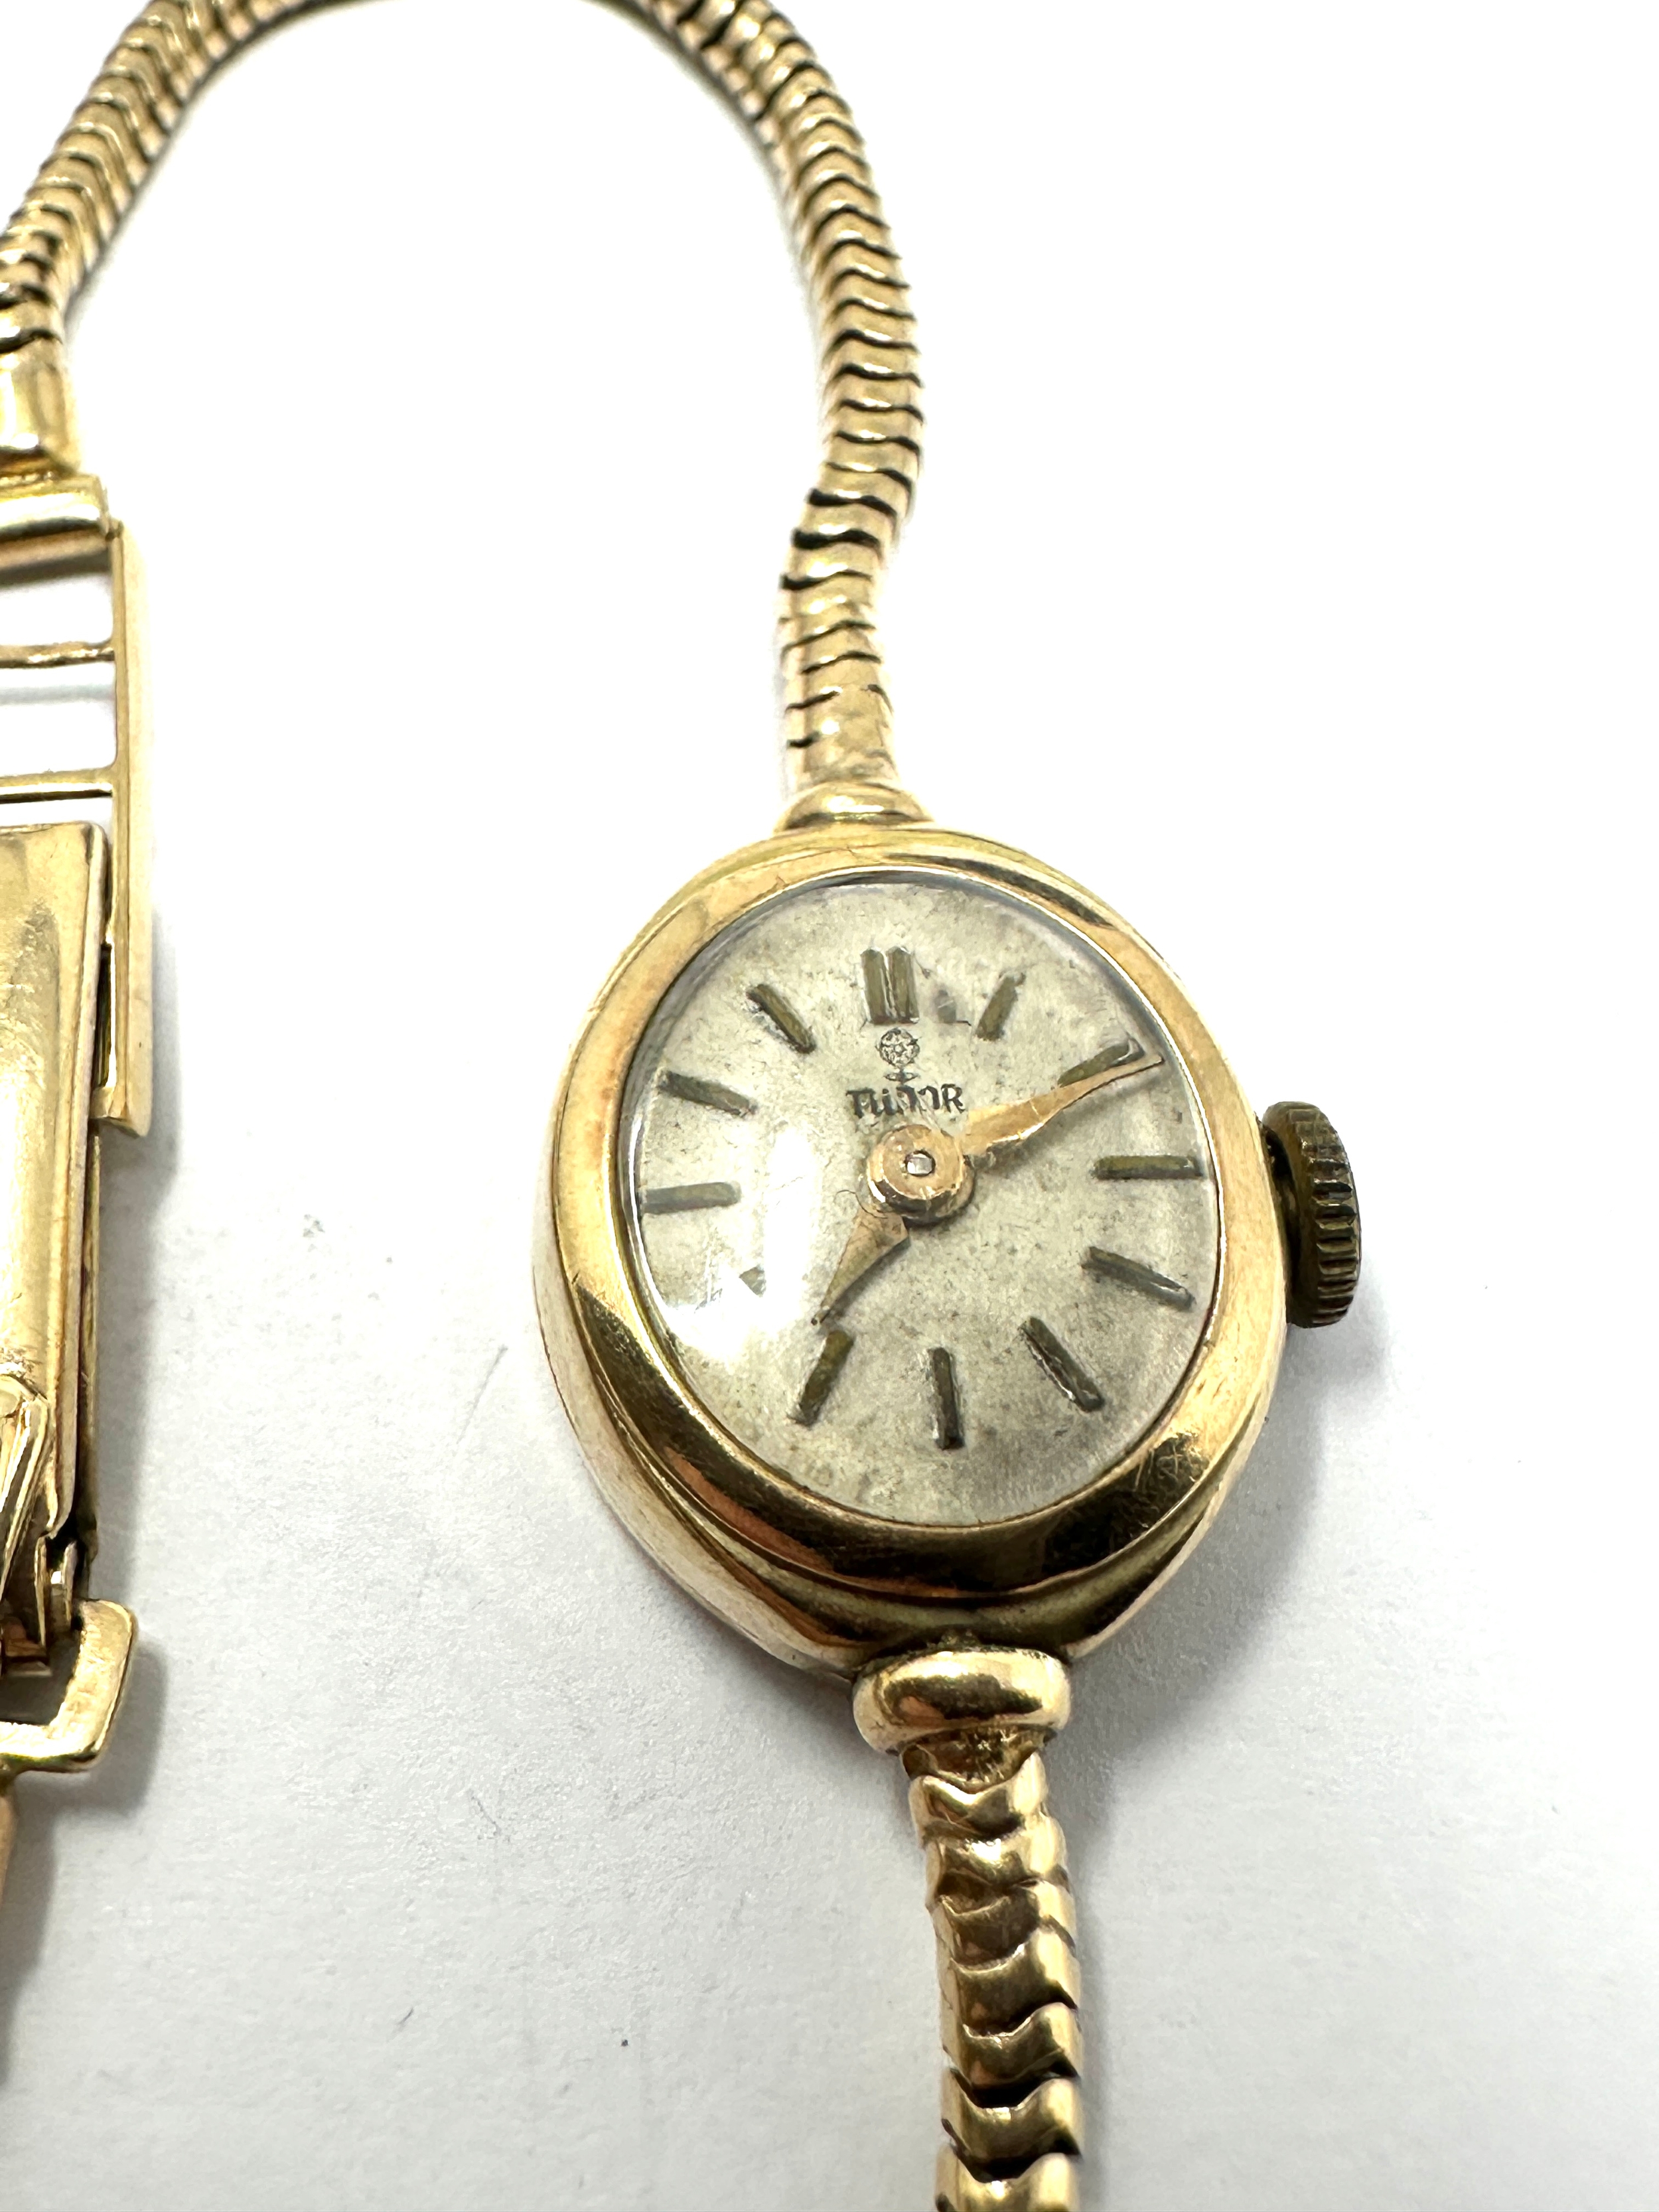 ladies 9ct gold rolex tudor wristwatch weight 11g the watch is ticking - Image 2 of 3